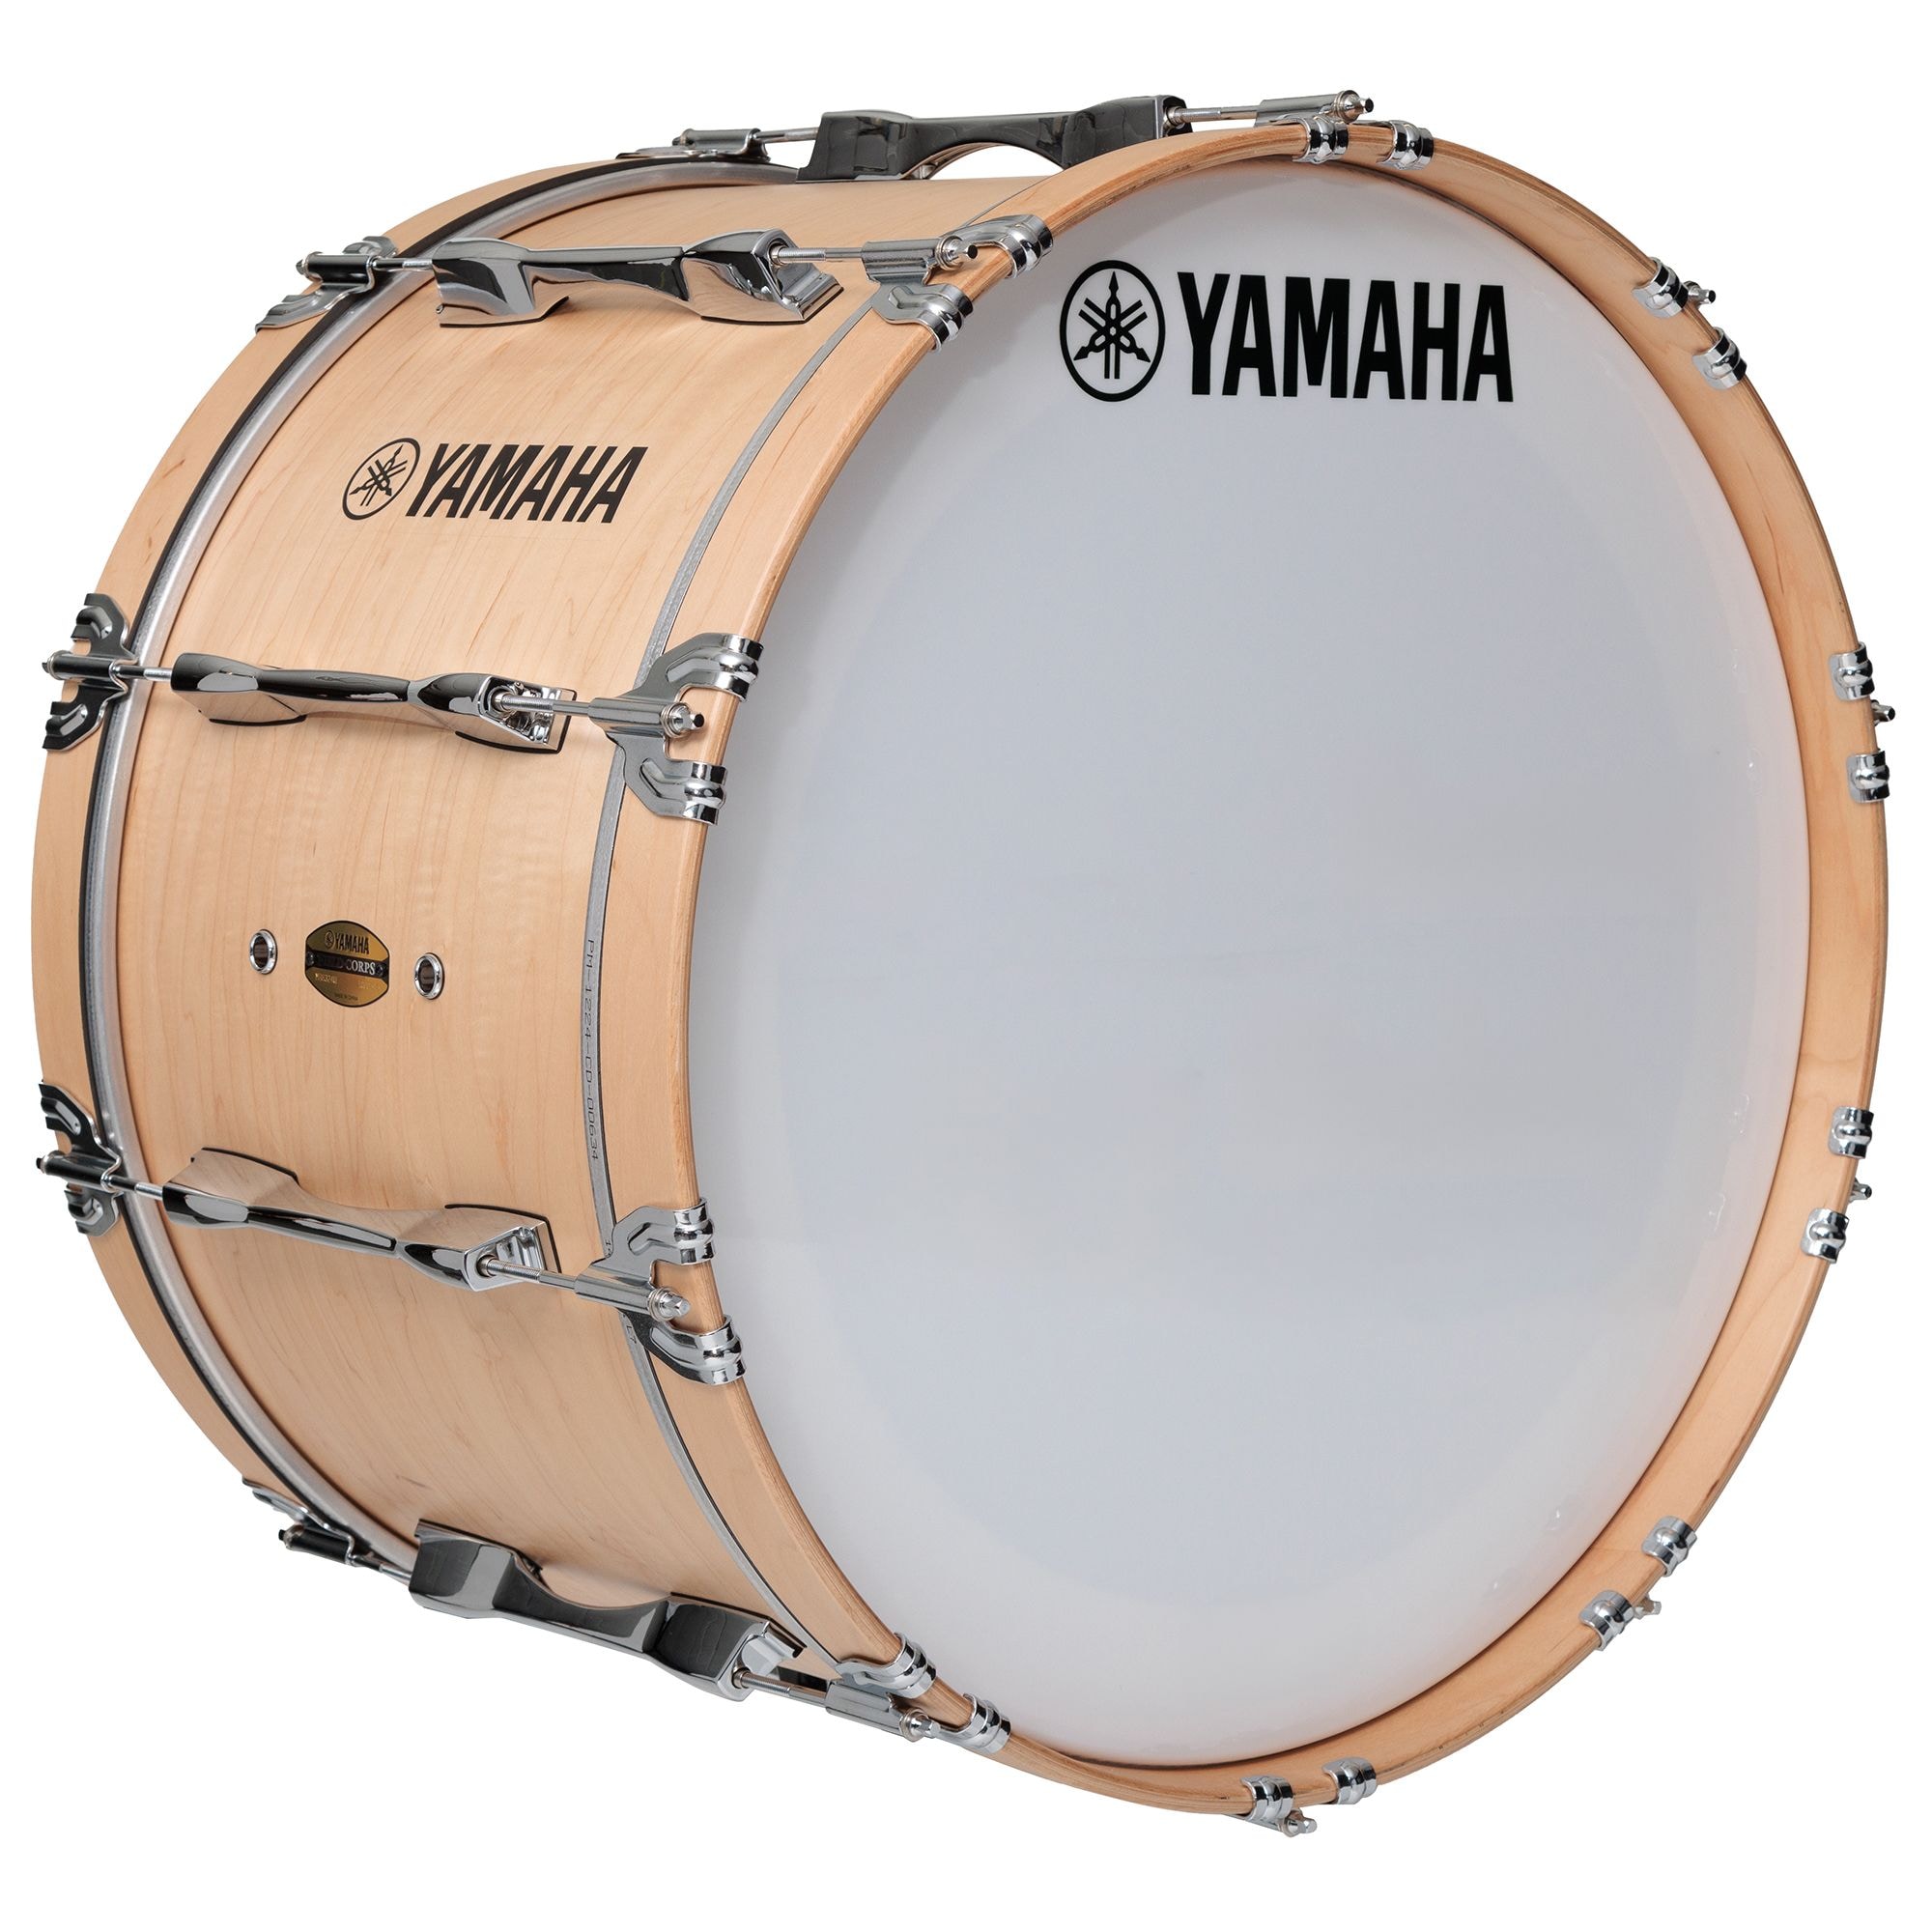 MB-8300 Field-Corps™ Series - Specs - Marching Drums - Marching